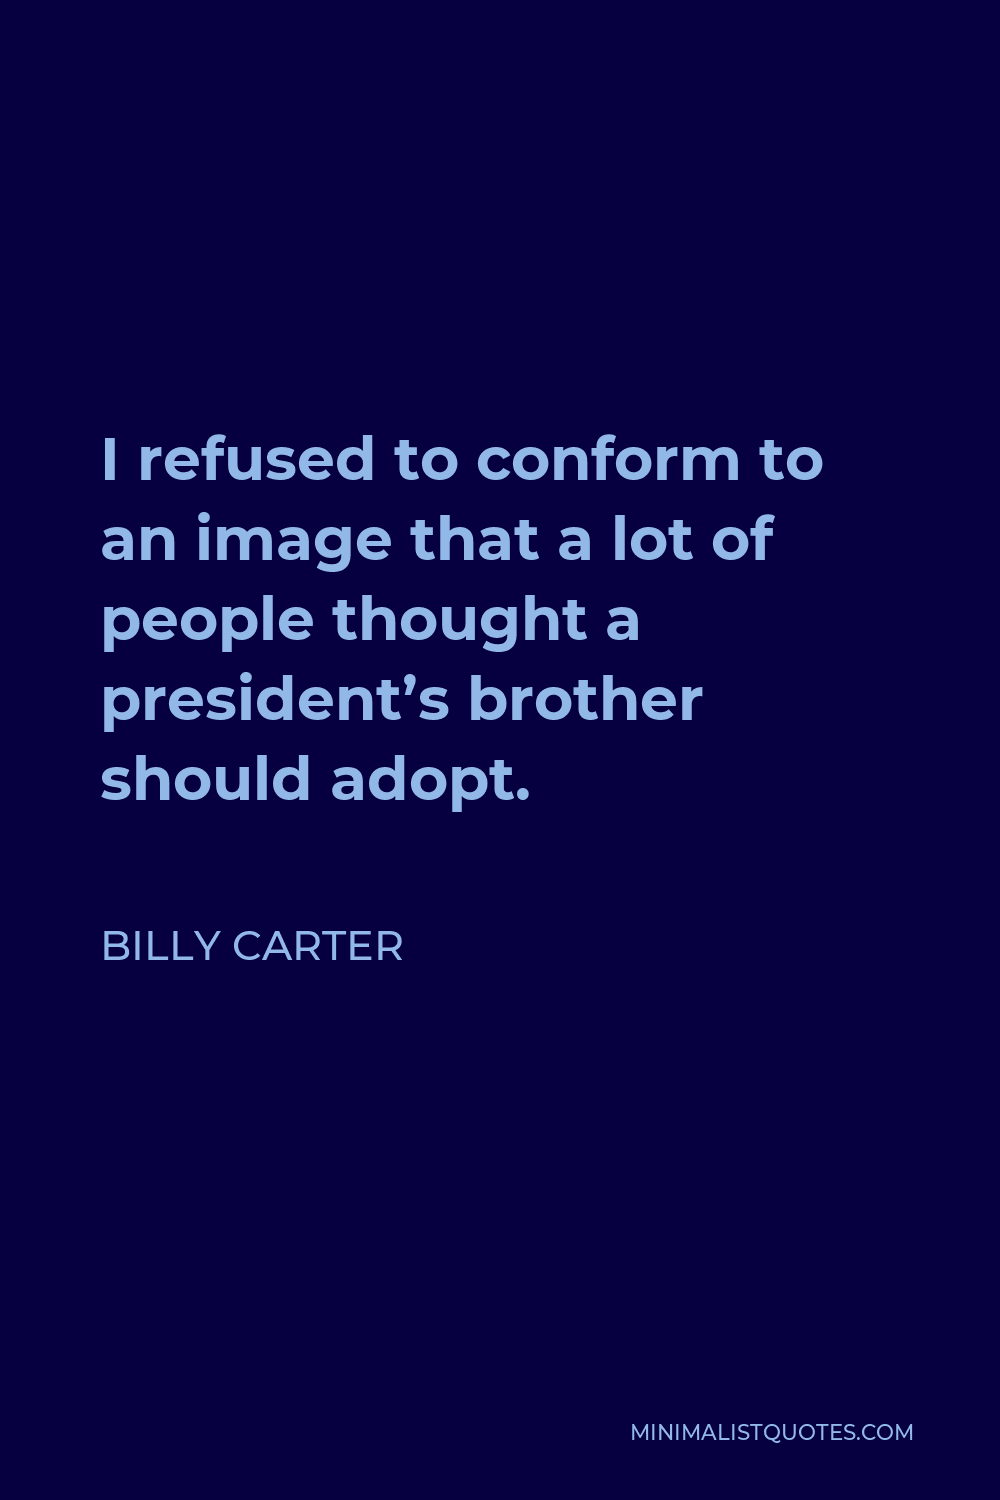 Billy Carter Quote - I refused to conform to an image that a lot of people thought a president’s brother should adopt.